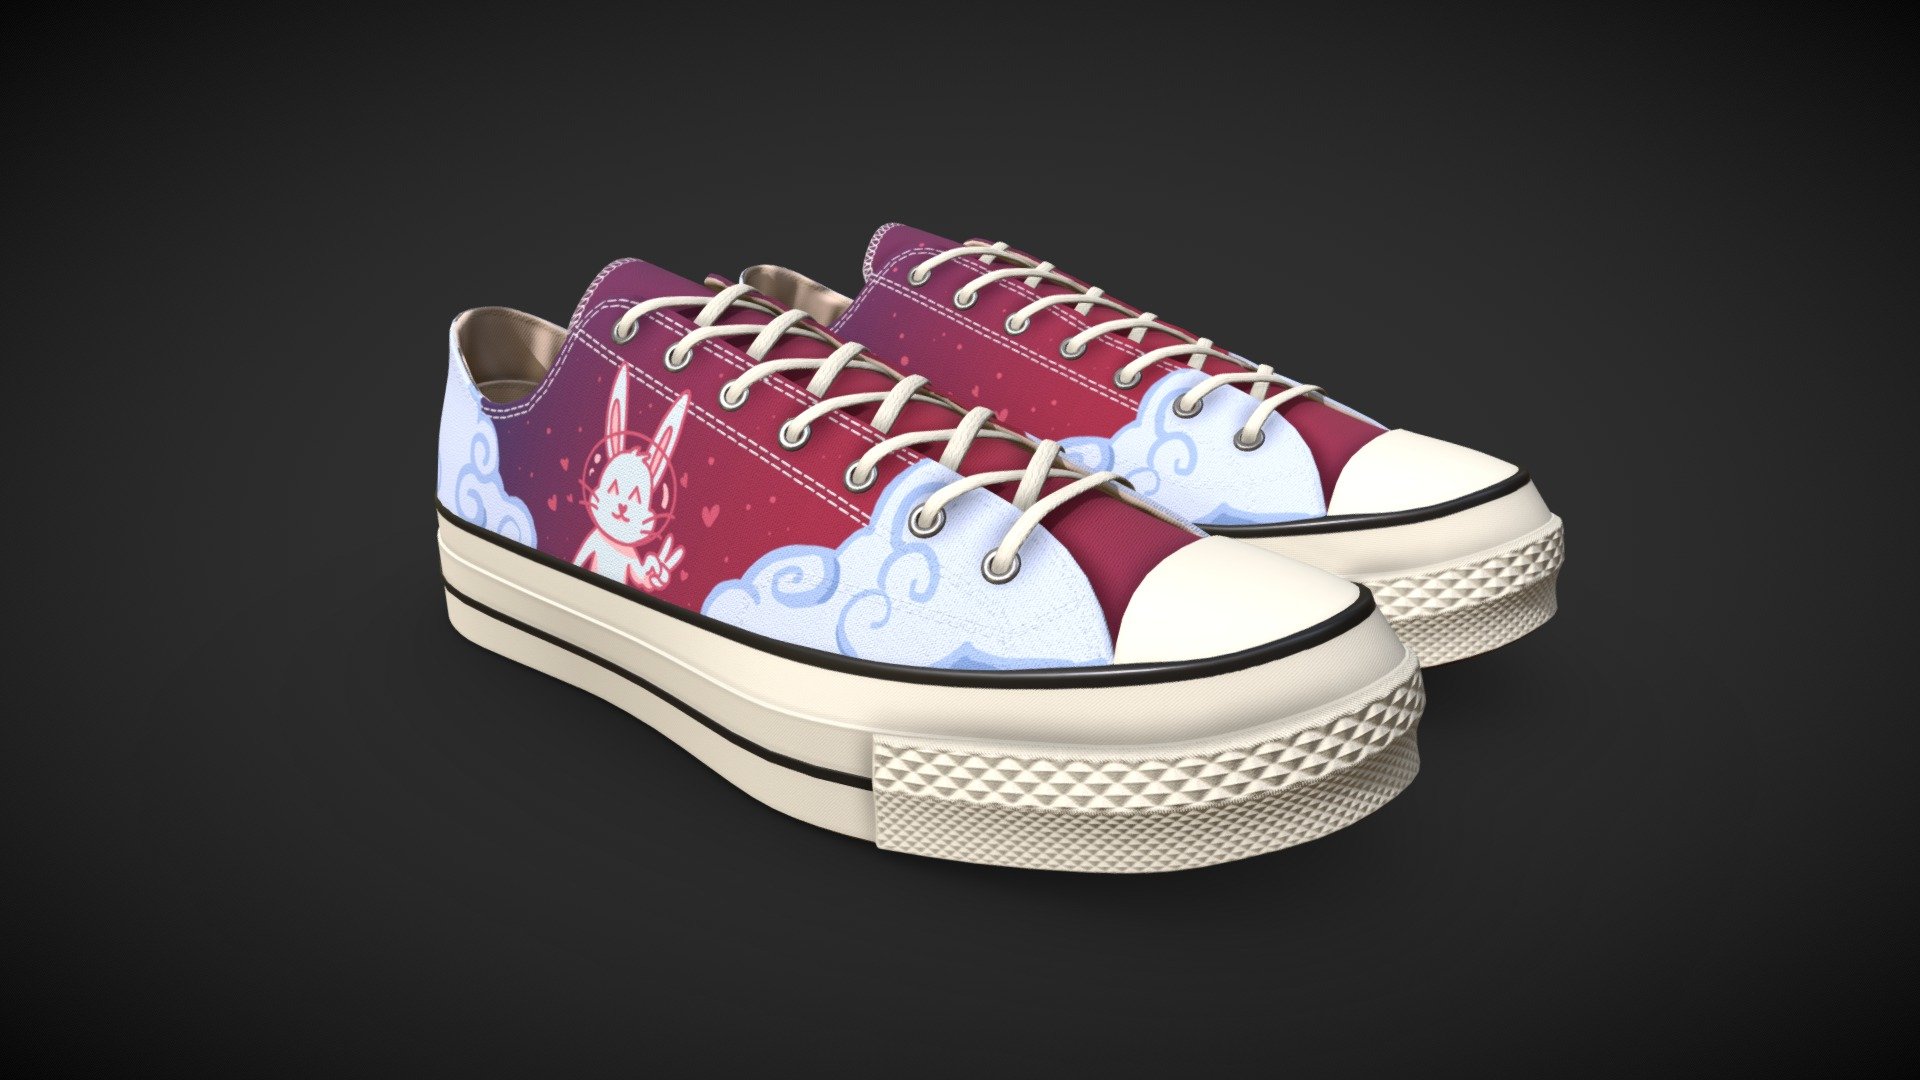 4k Textures
Converse Shoes designed by me. I used substance painter for drawing bunny and clouds 3d model